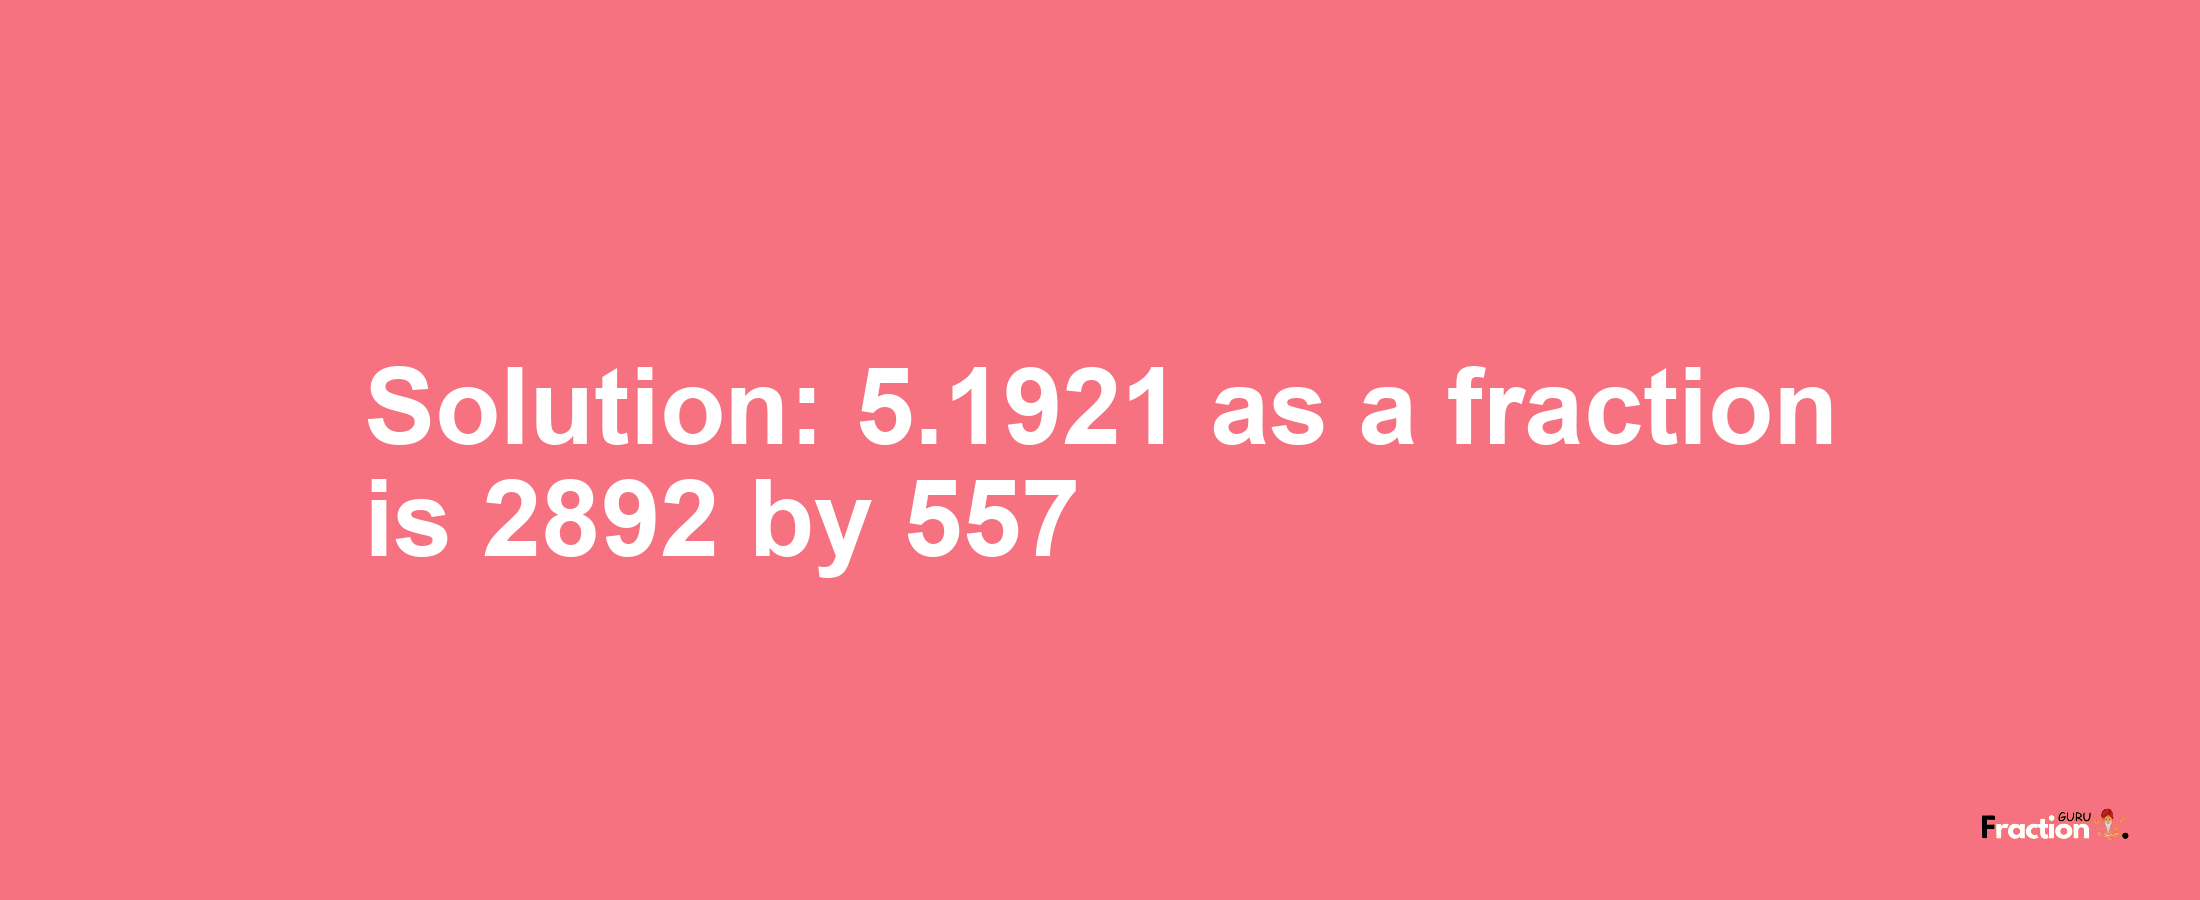 Solution:5.1921 as a fraction is 2892/557